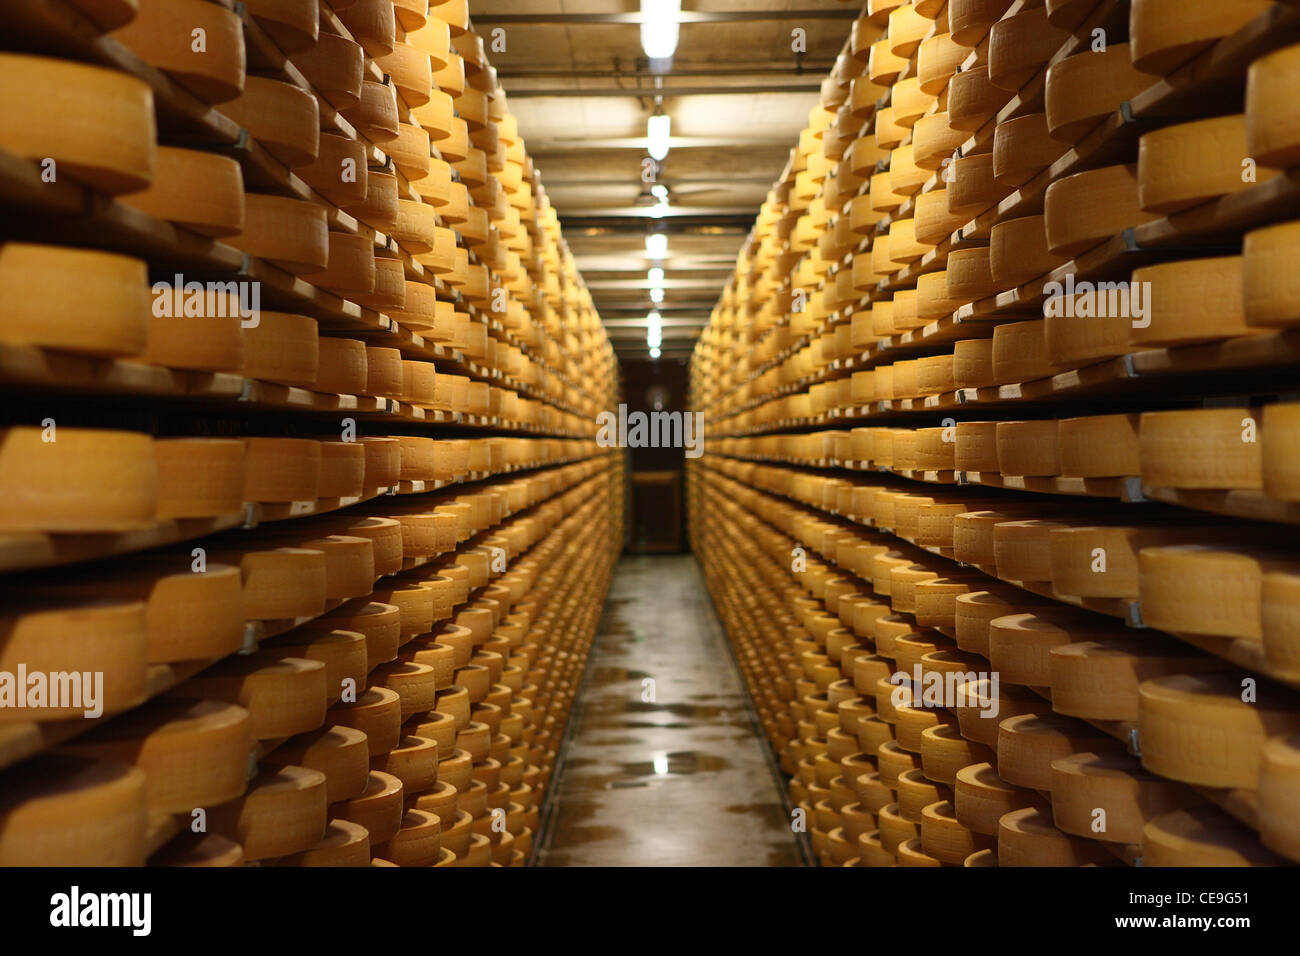 Cheese factory in Gruyères, Switzerland. Cheese ripening on the shelves. Stock Photo